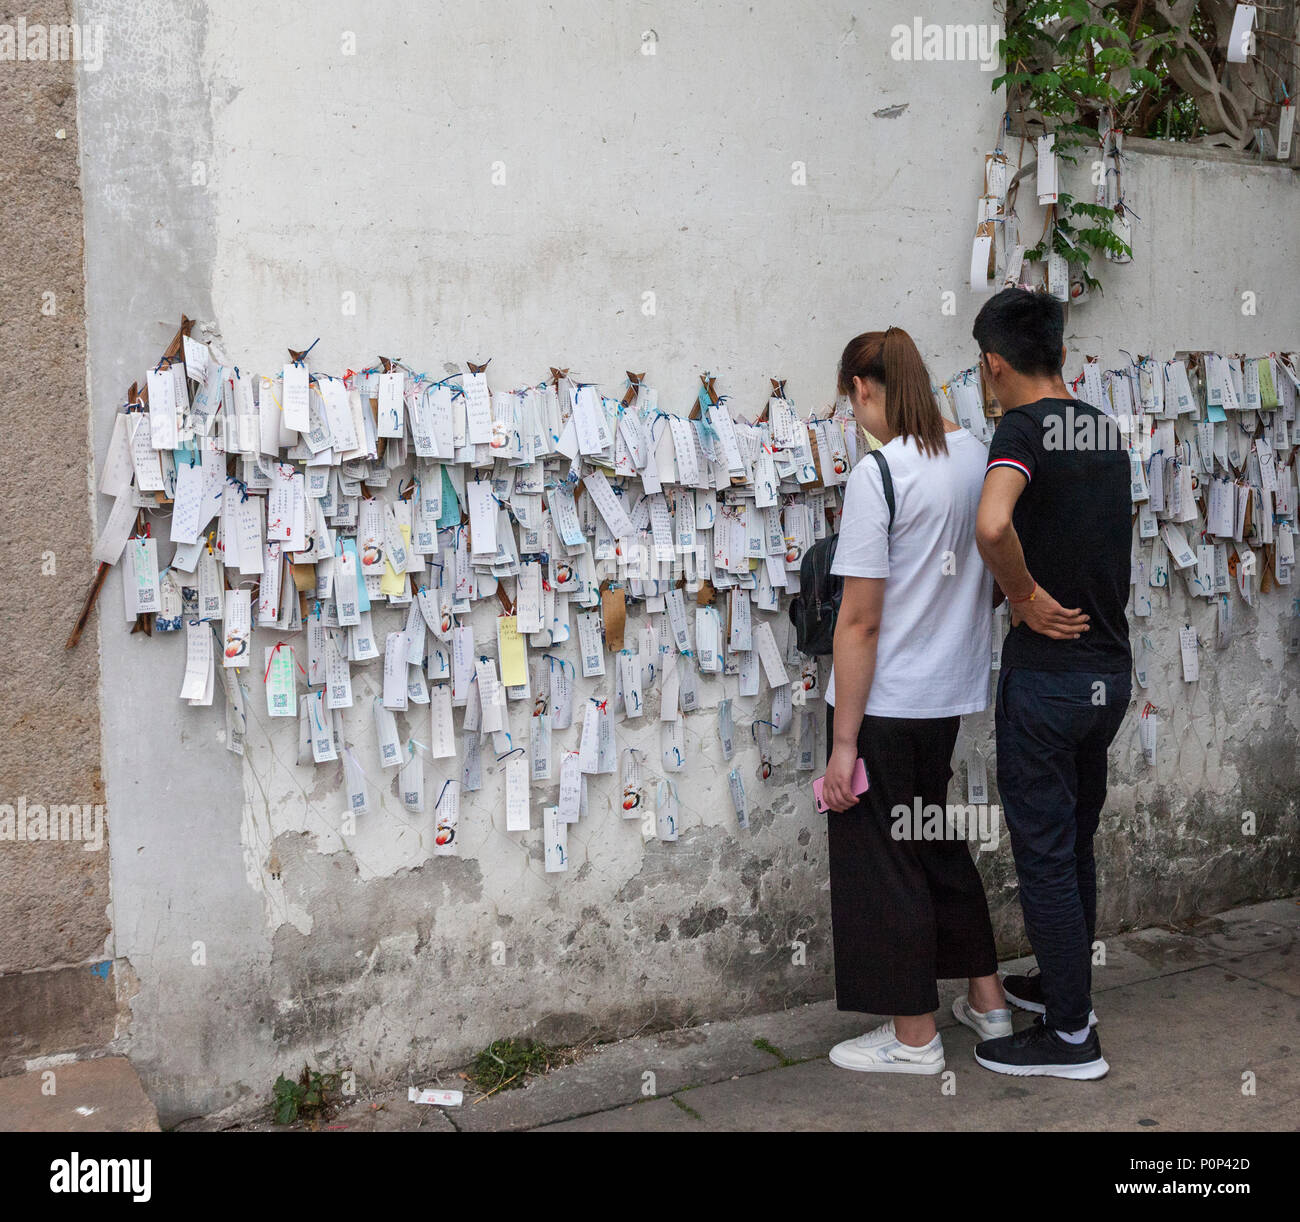 Suzhou, Jiangsu, China.  Couple Examining Tags Containing Hopes for Good Wishes, left by Passersby.  Shantang District. Stock Photo